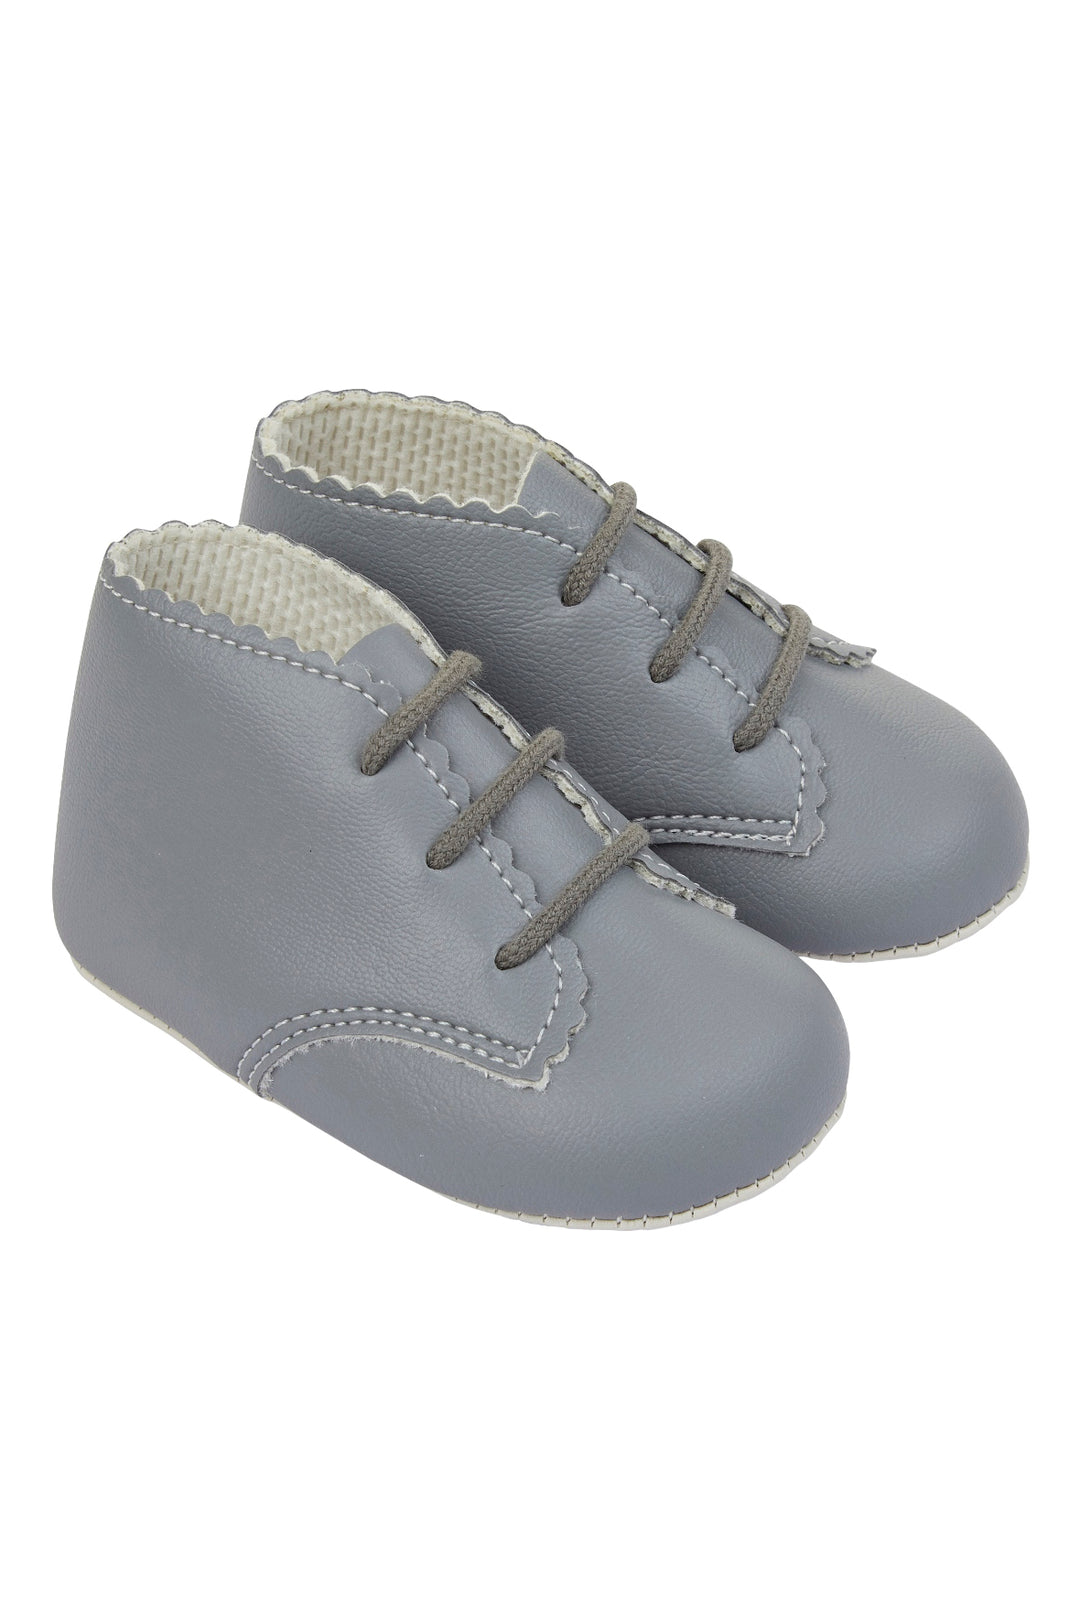 Baypods Grey Soft Sole Booties | Millie and John